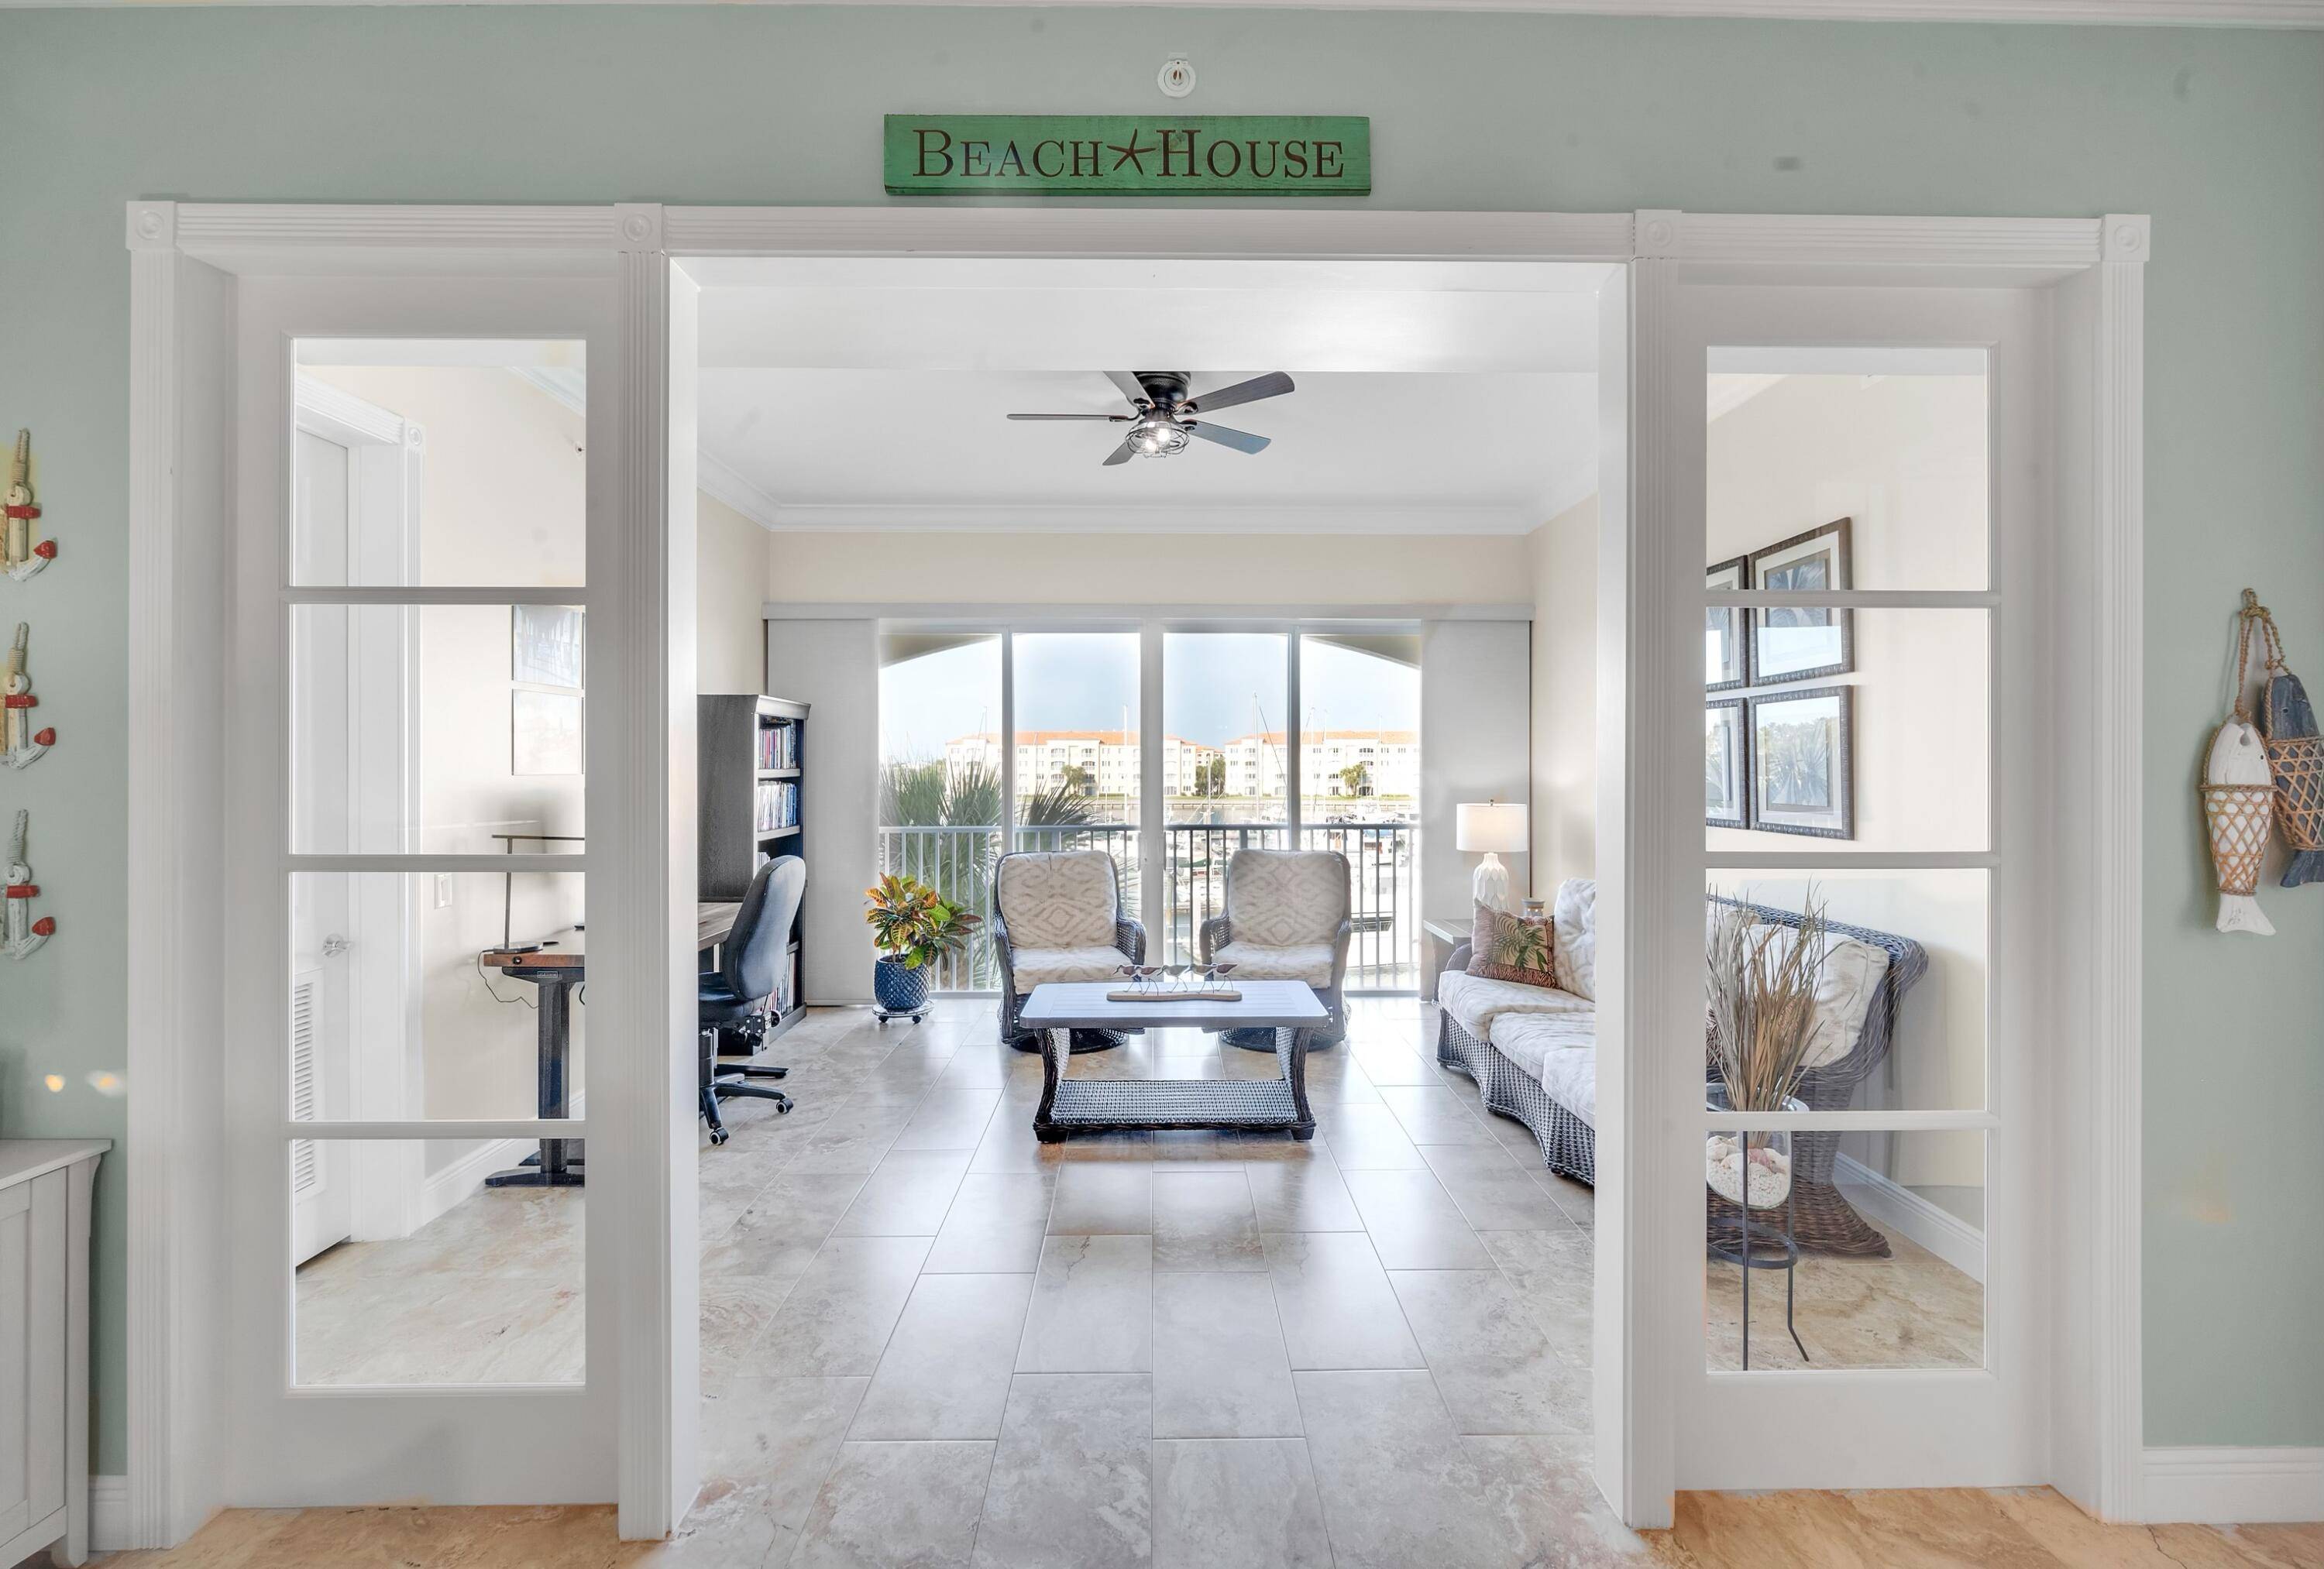 Nestled along the scenic Indian River Lagoon, this meticulous gem has been cherished by its owners and exhibits pride of ownership at every turn !